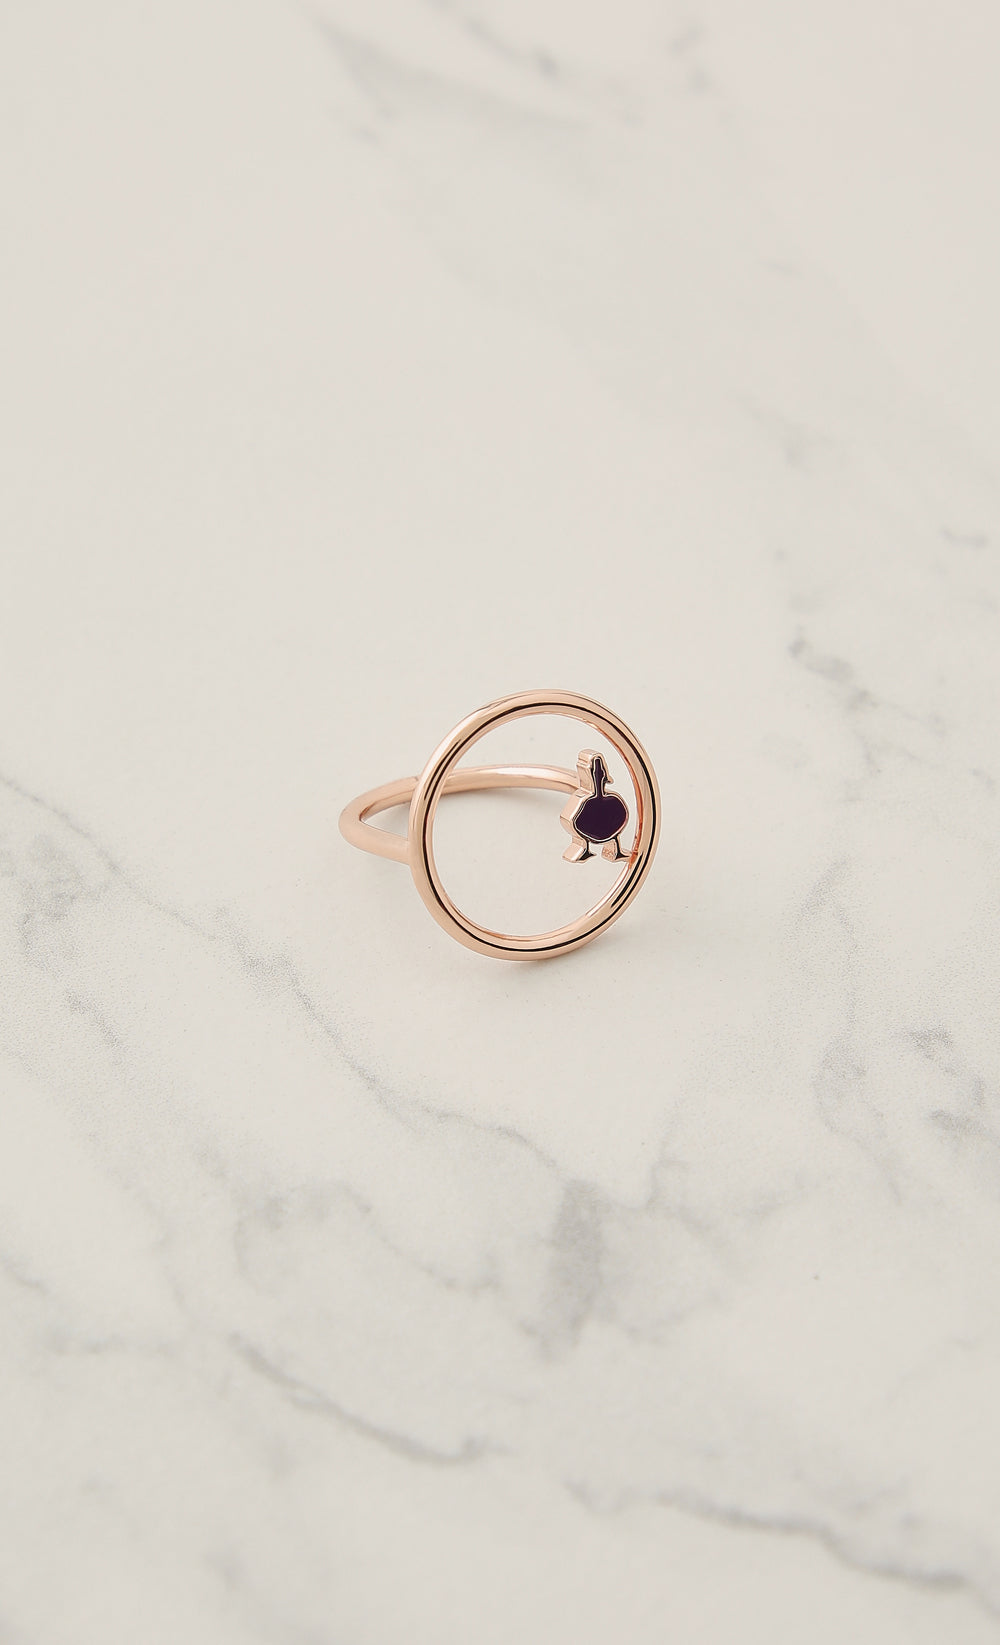 Moon Scarf Ring in Rose Gold